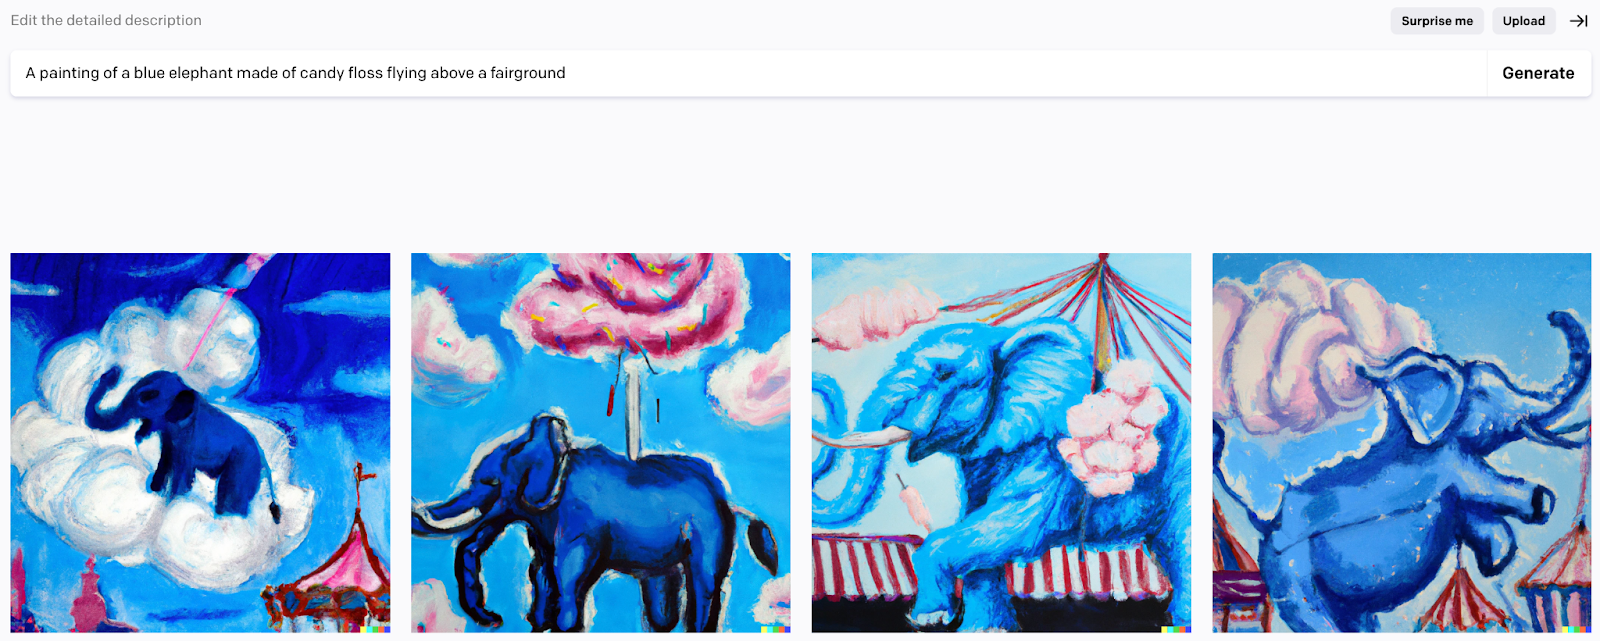 DALL-E results for “a painting of a blue elephant made of candy floss flying above a fairground” prompt